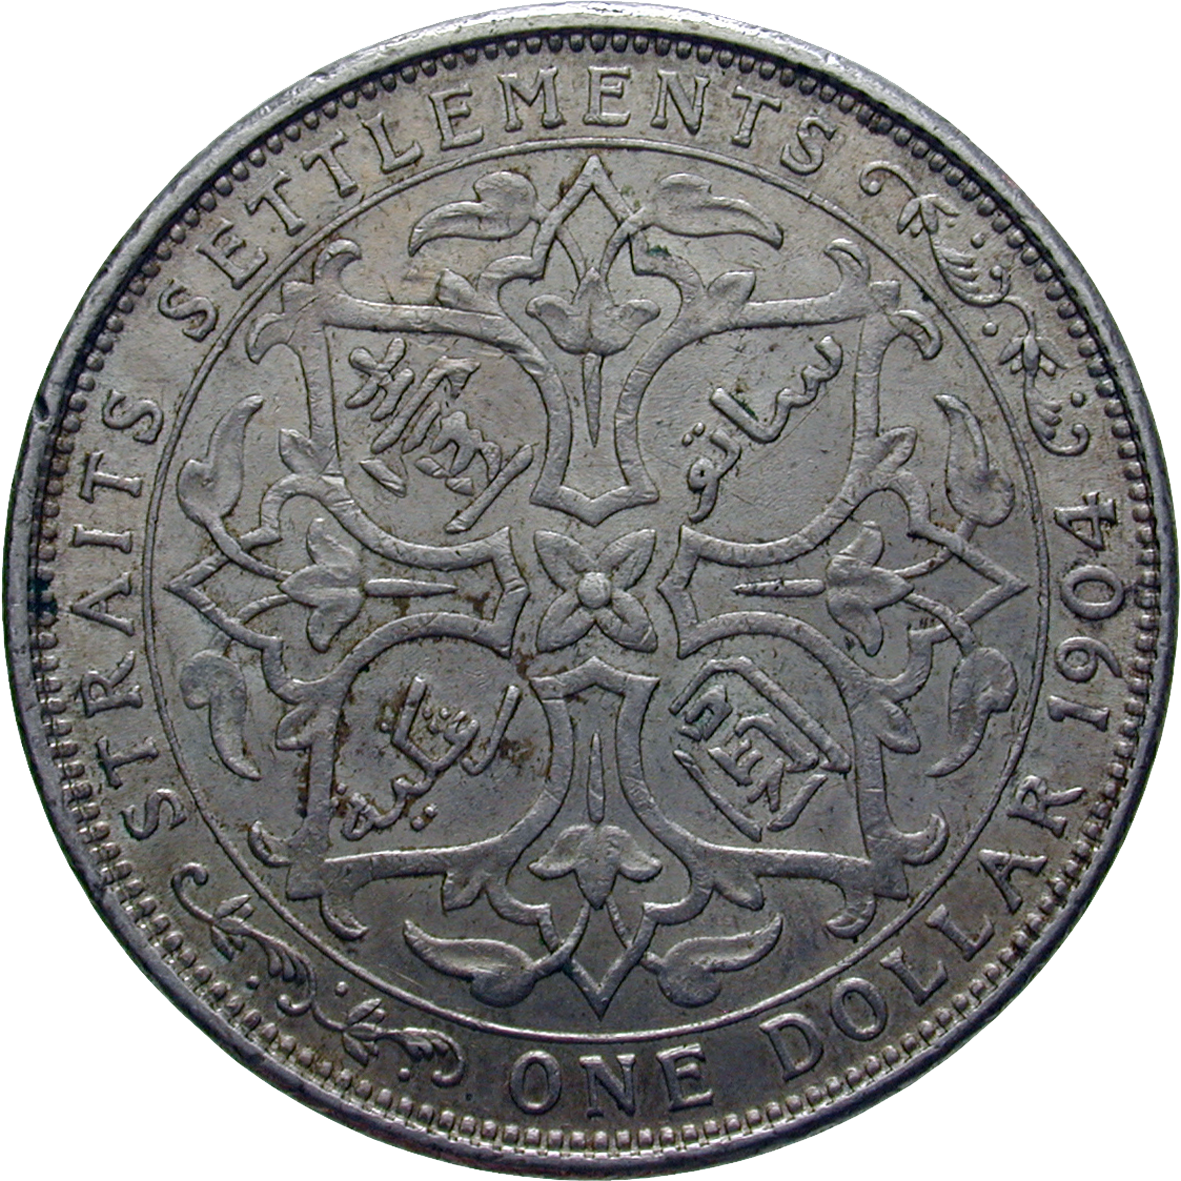 United Kingdom of Great Britain for the Straits Settlements, Edward VII, 1 Dollar 1904 (reverse)